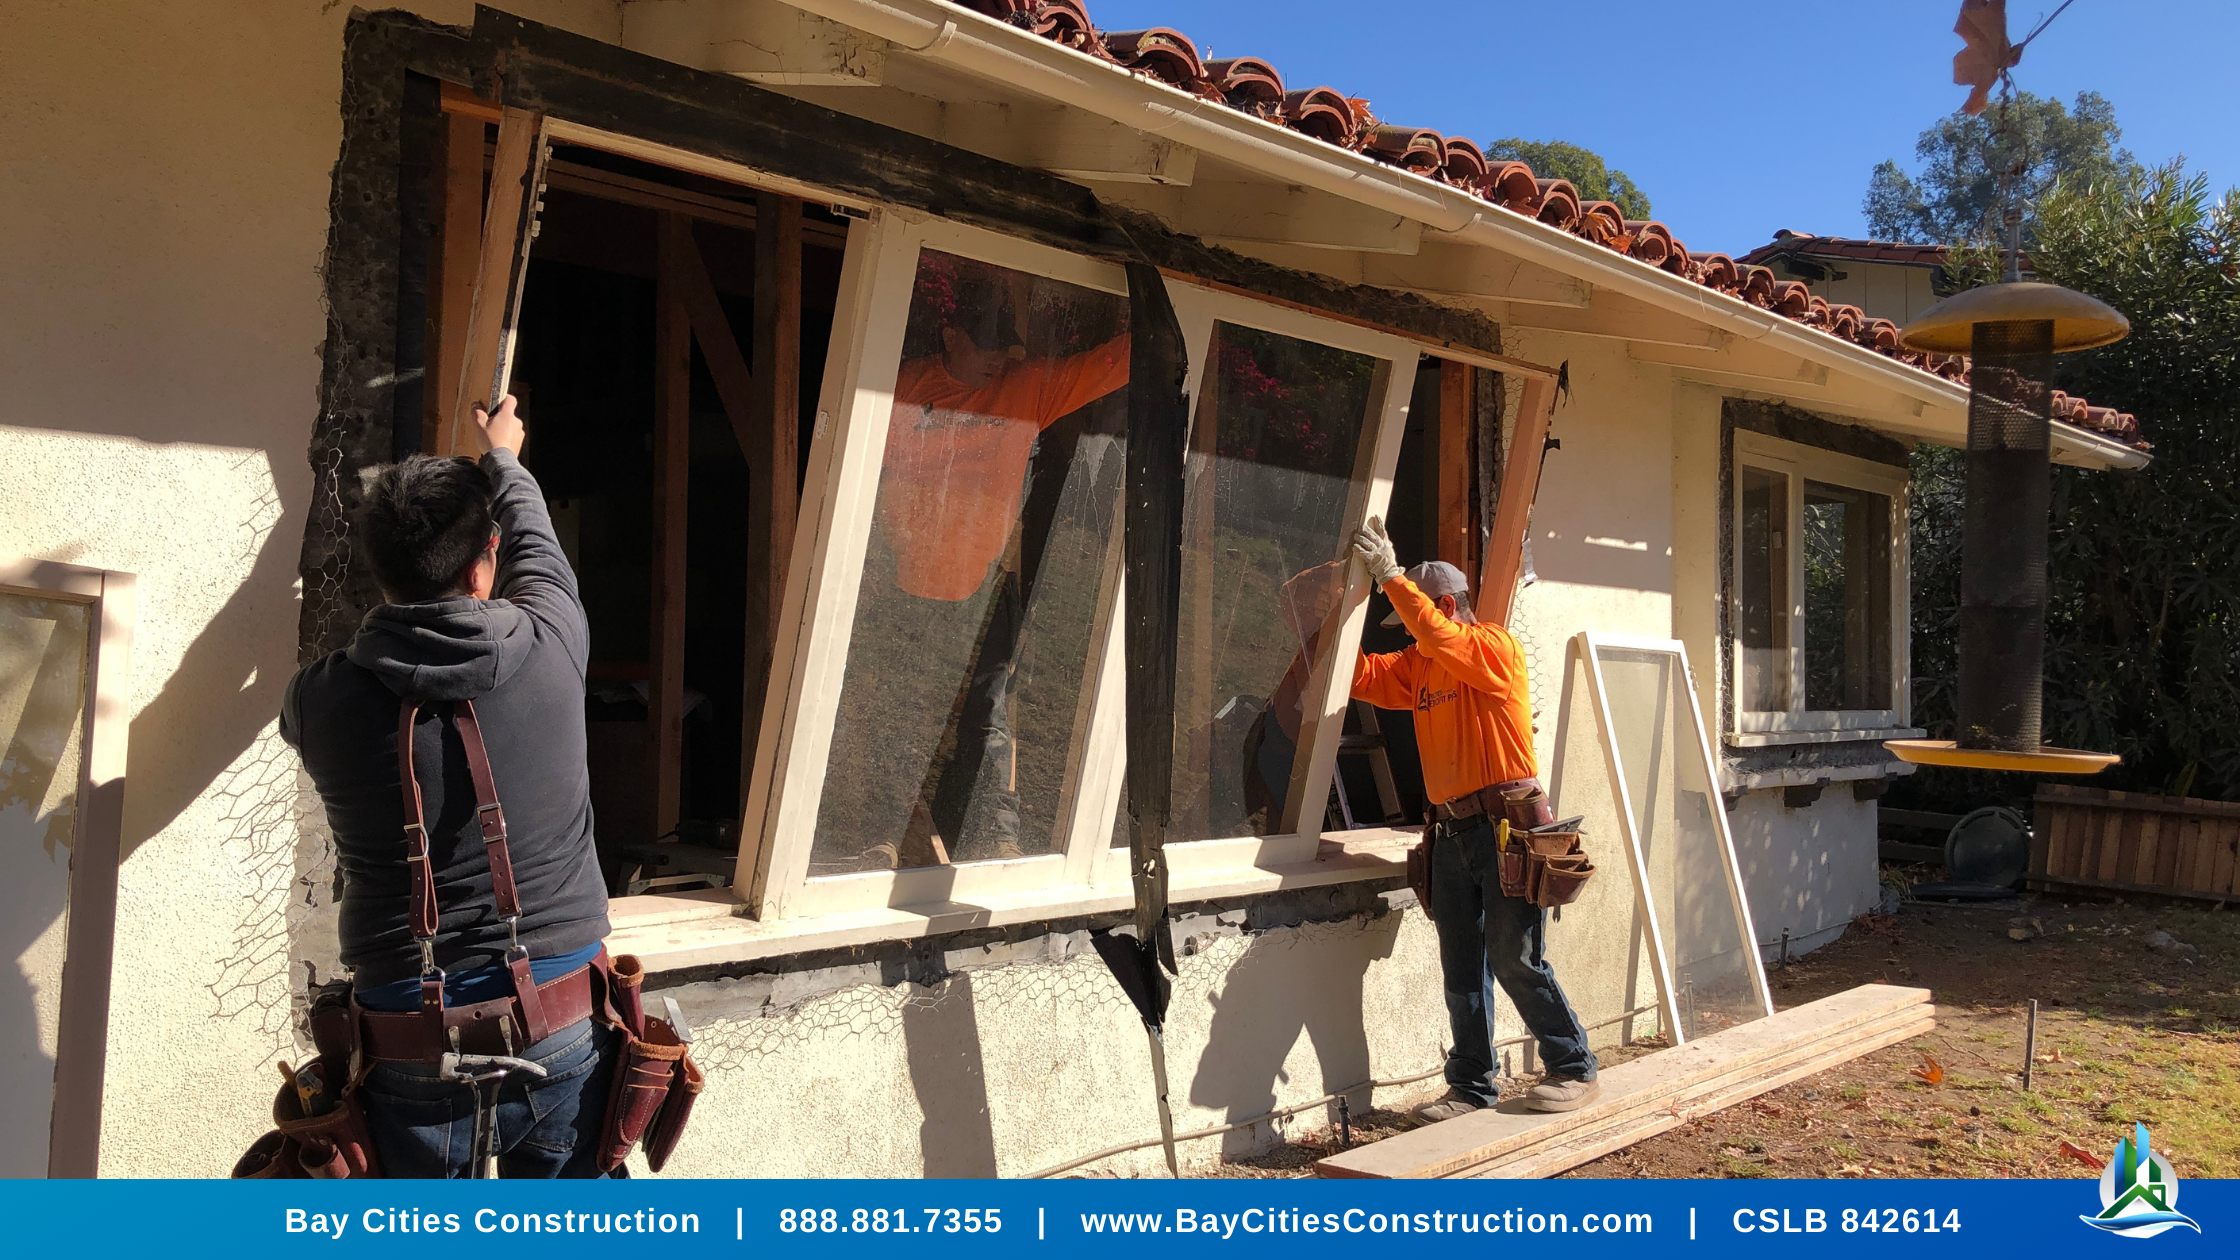 1 removal - new wood window - replacement - bay cities construction - palos verdes